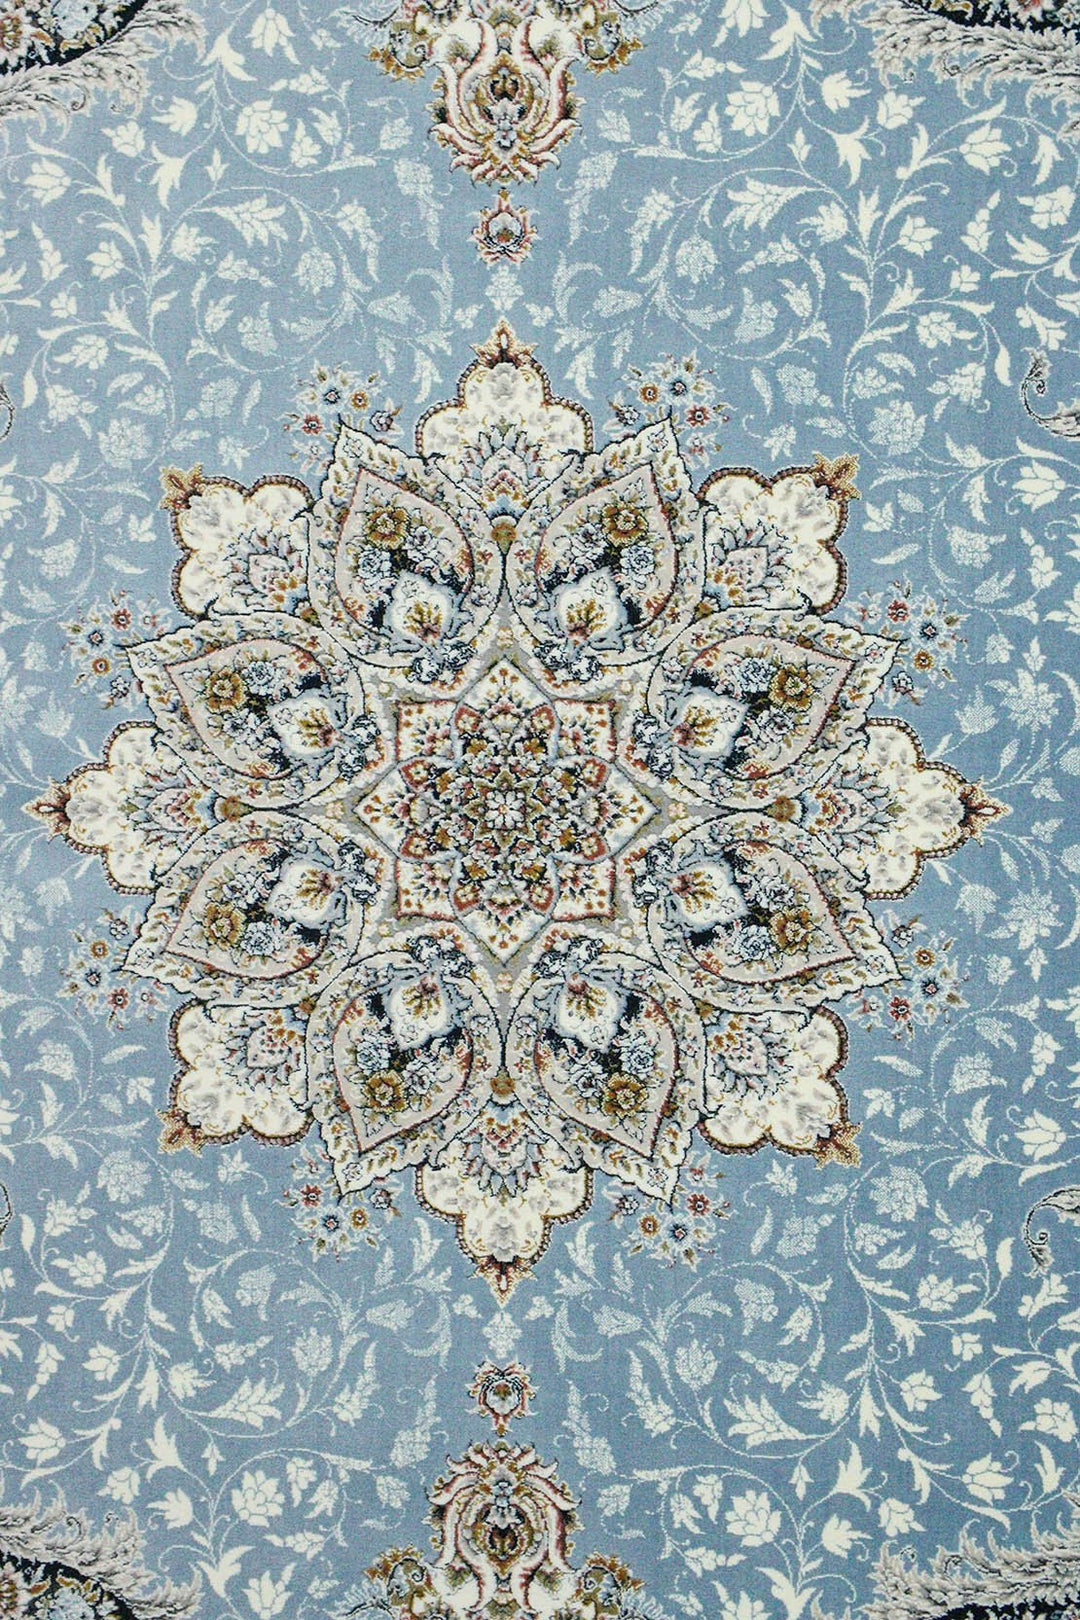 Iranian Premium Quality Authentic 1500 Rug - 6.5 x 9.8 FT - Blue - Resilient Construction for Long-Lasting Use - V Surfaces